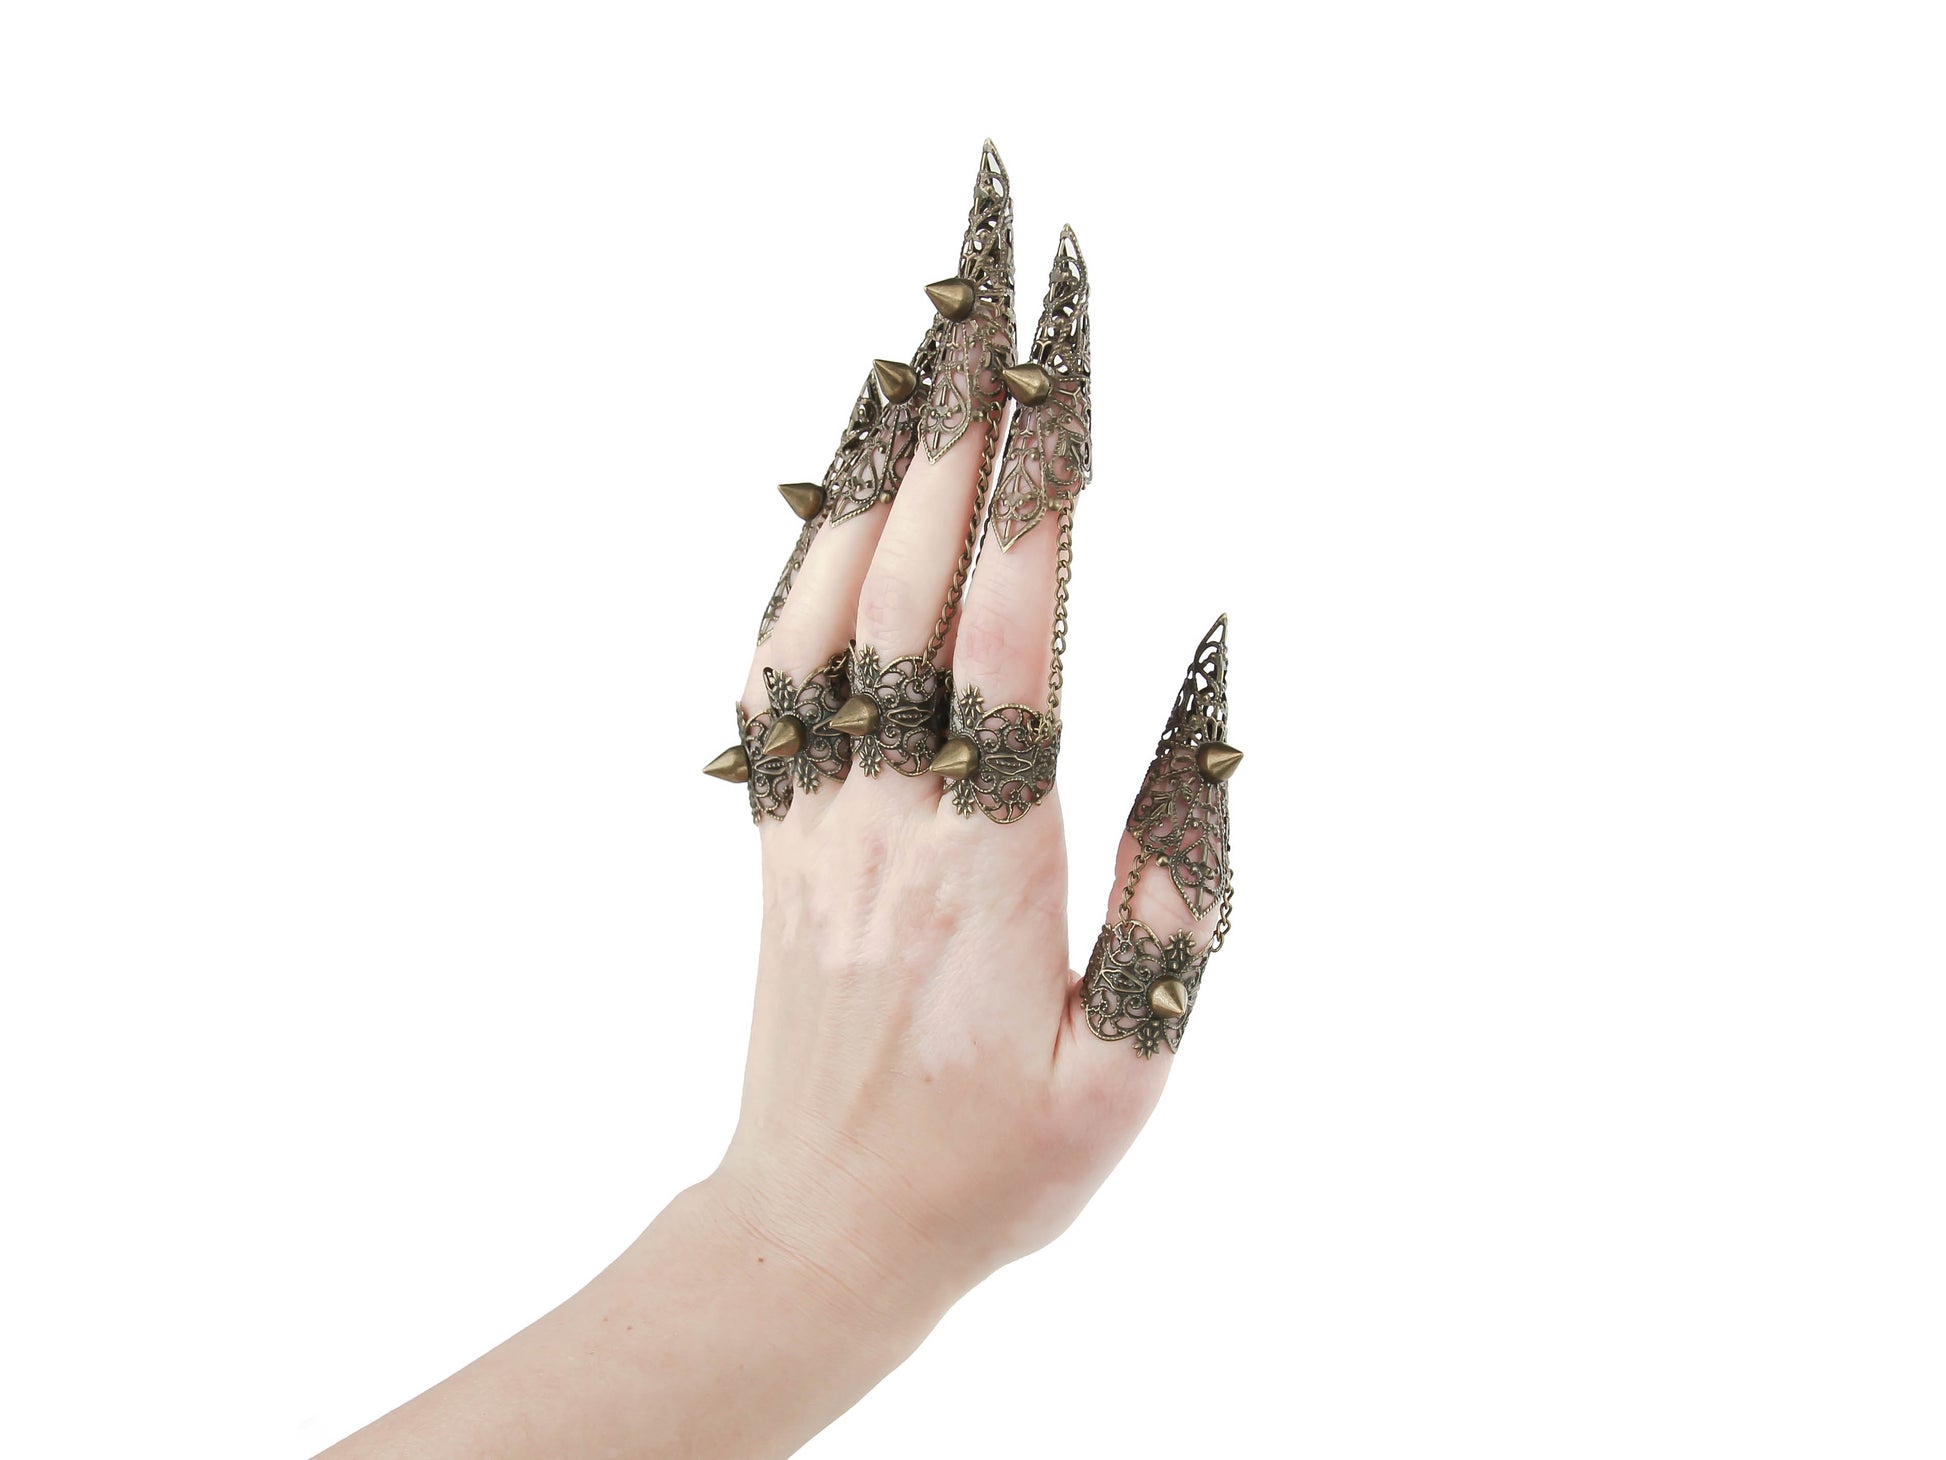 An artistic display of Myril Jewels' bronze claw rings with studs, capturing the essence of neo gothic design. These unique pieces embody the dark avant-garde, suitable for Halloween events, festival wear, or as a bold statement in a gothic-chic wardrobe